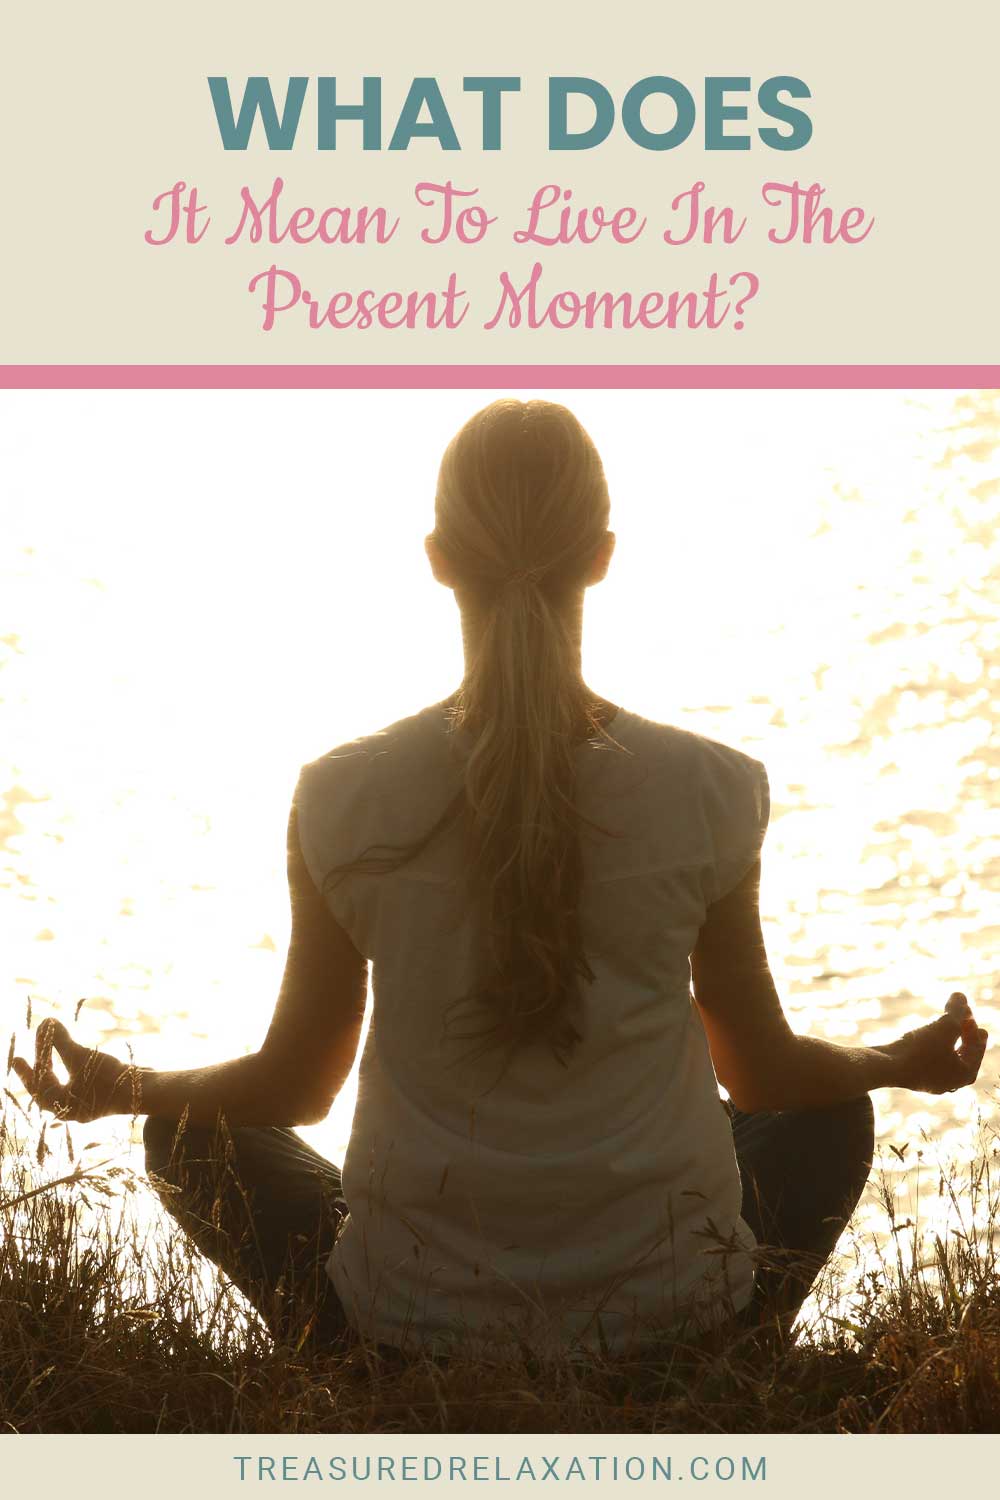 Woman meditating near a lake - What Does It Mean To Live In The Present Moment?